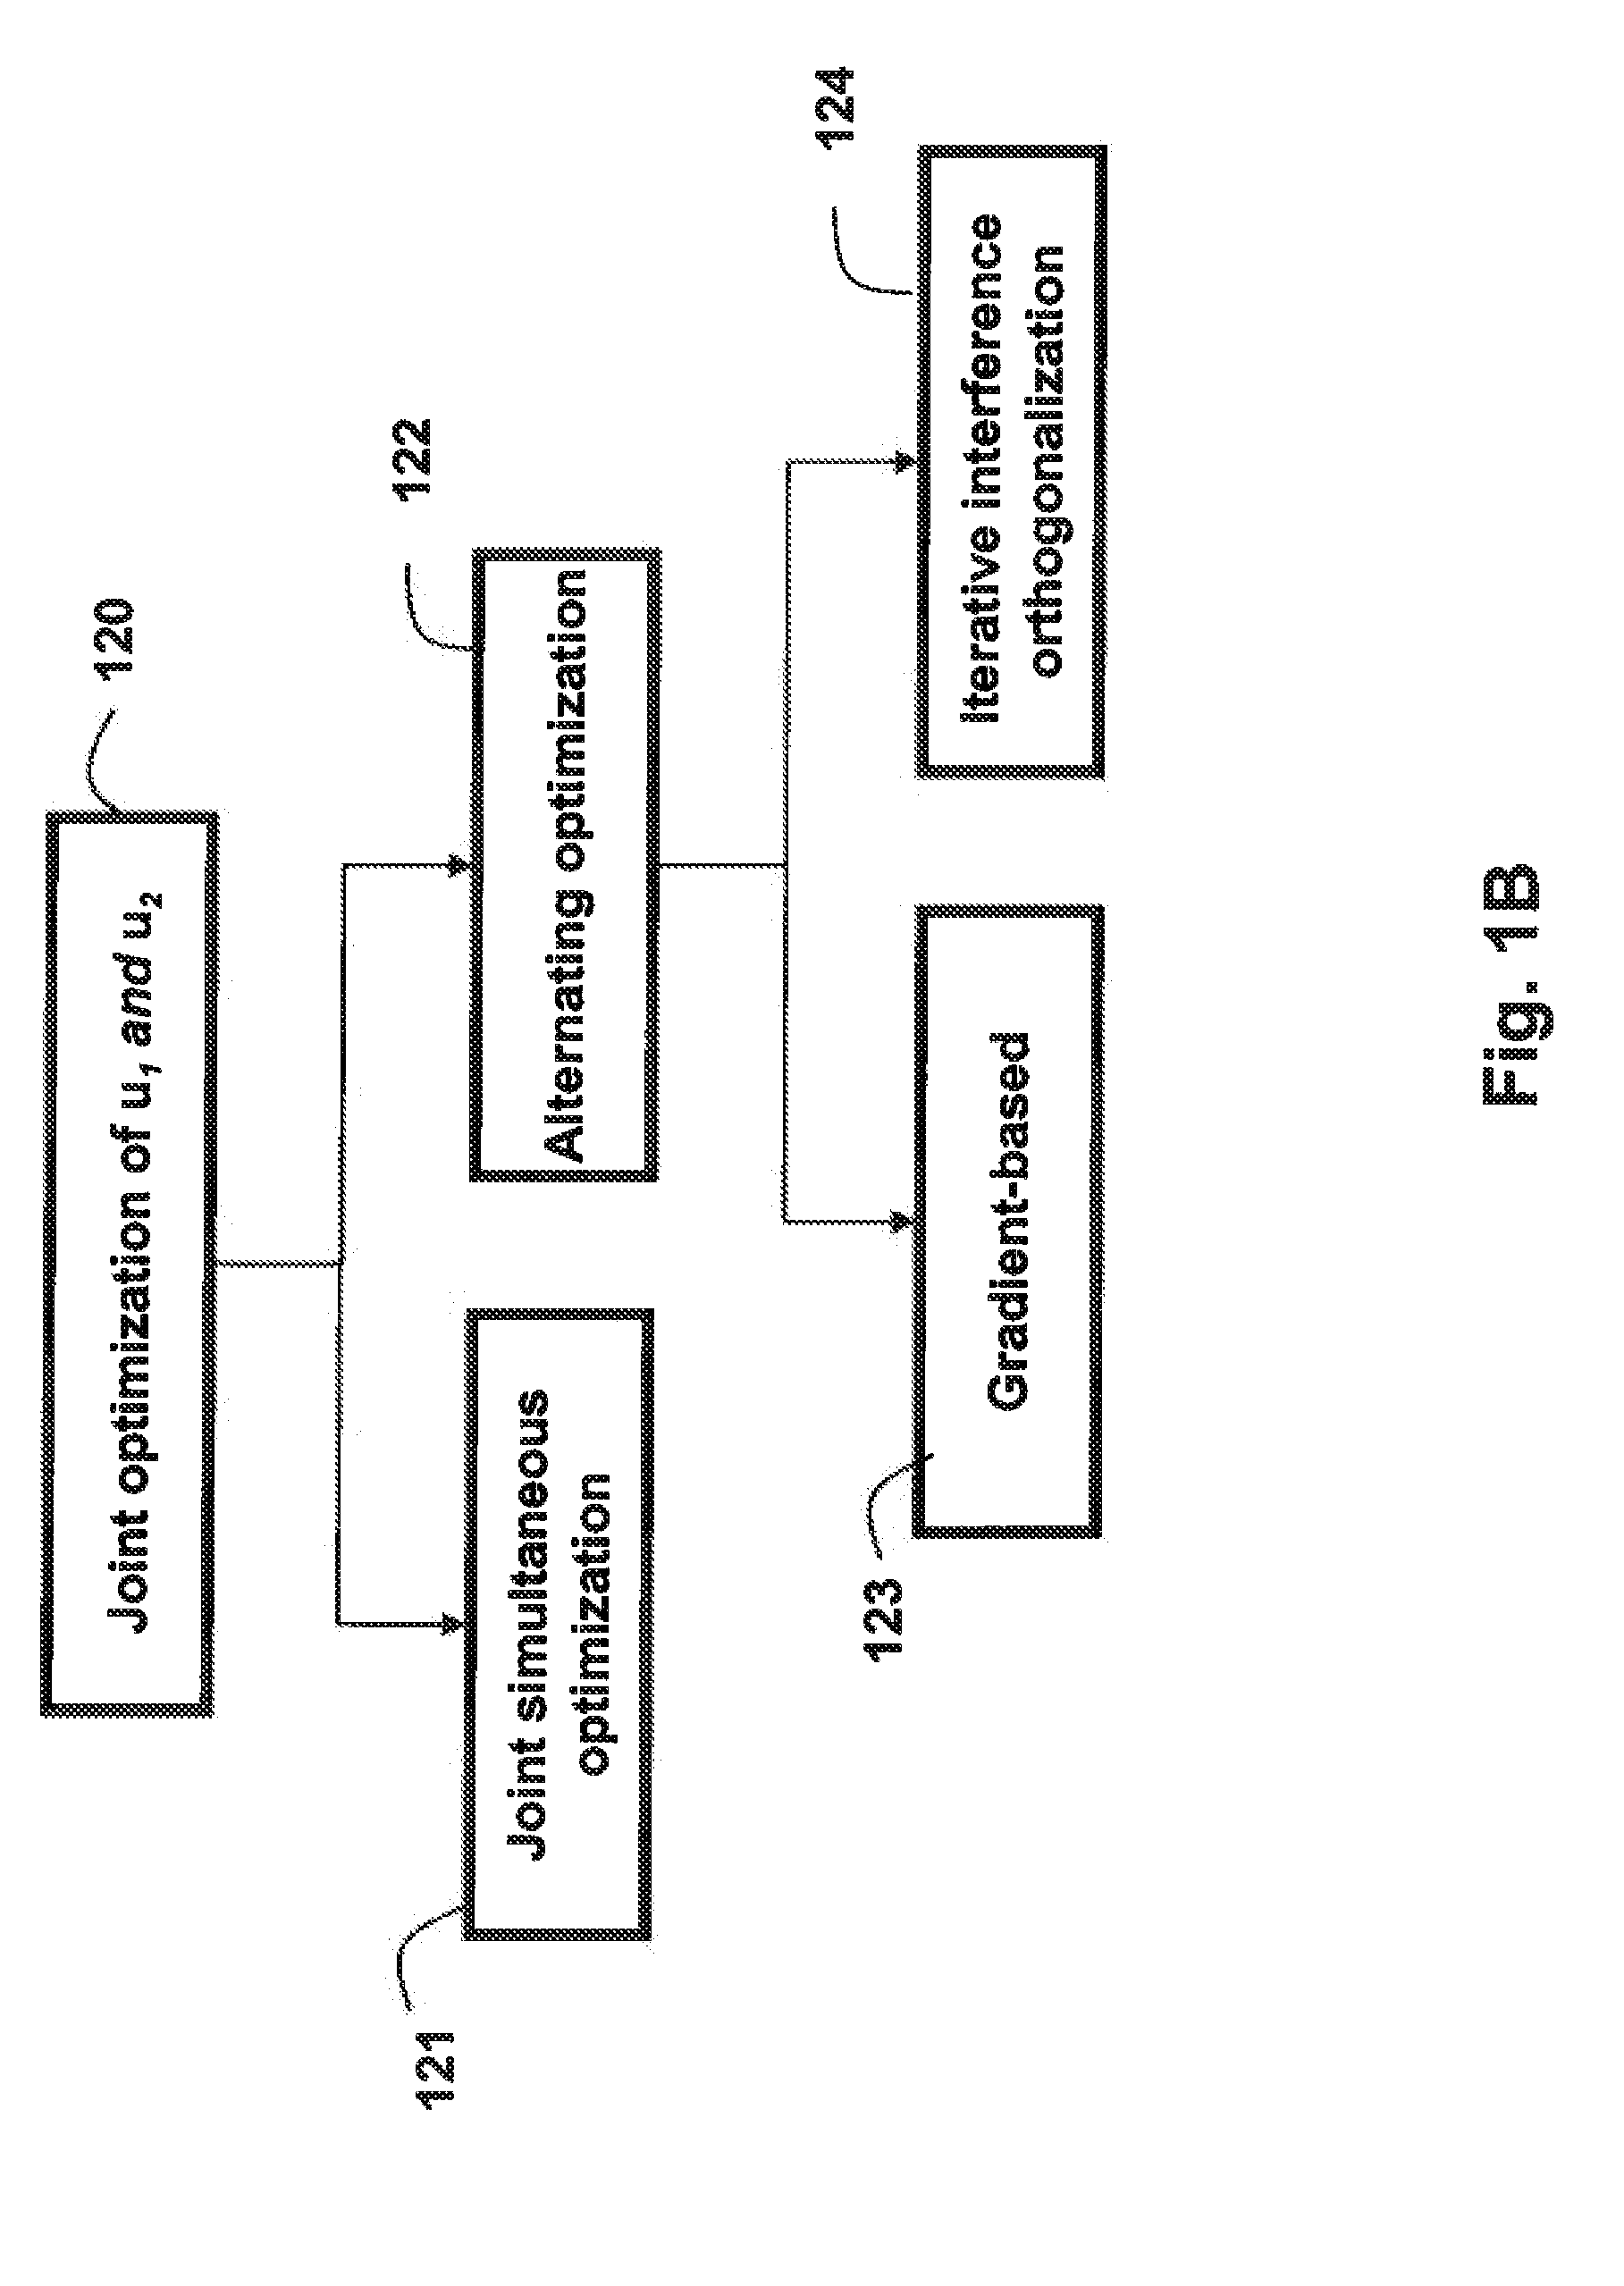 Method for Reducing Interference in Multi-Cell Multi-User Wireless Networks